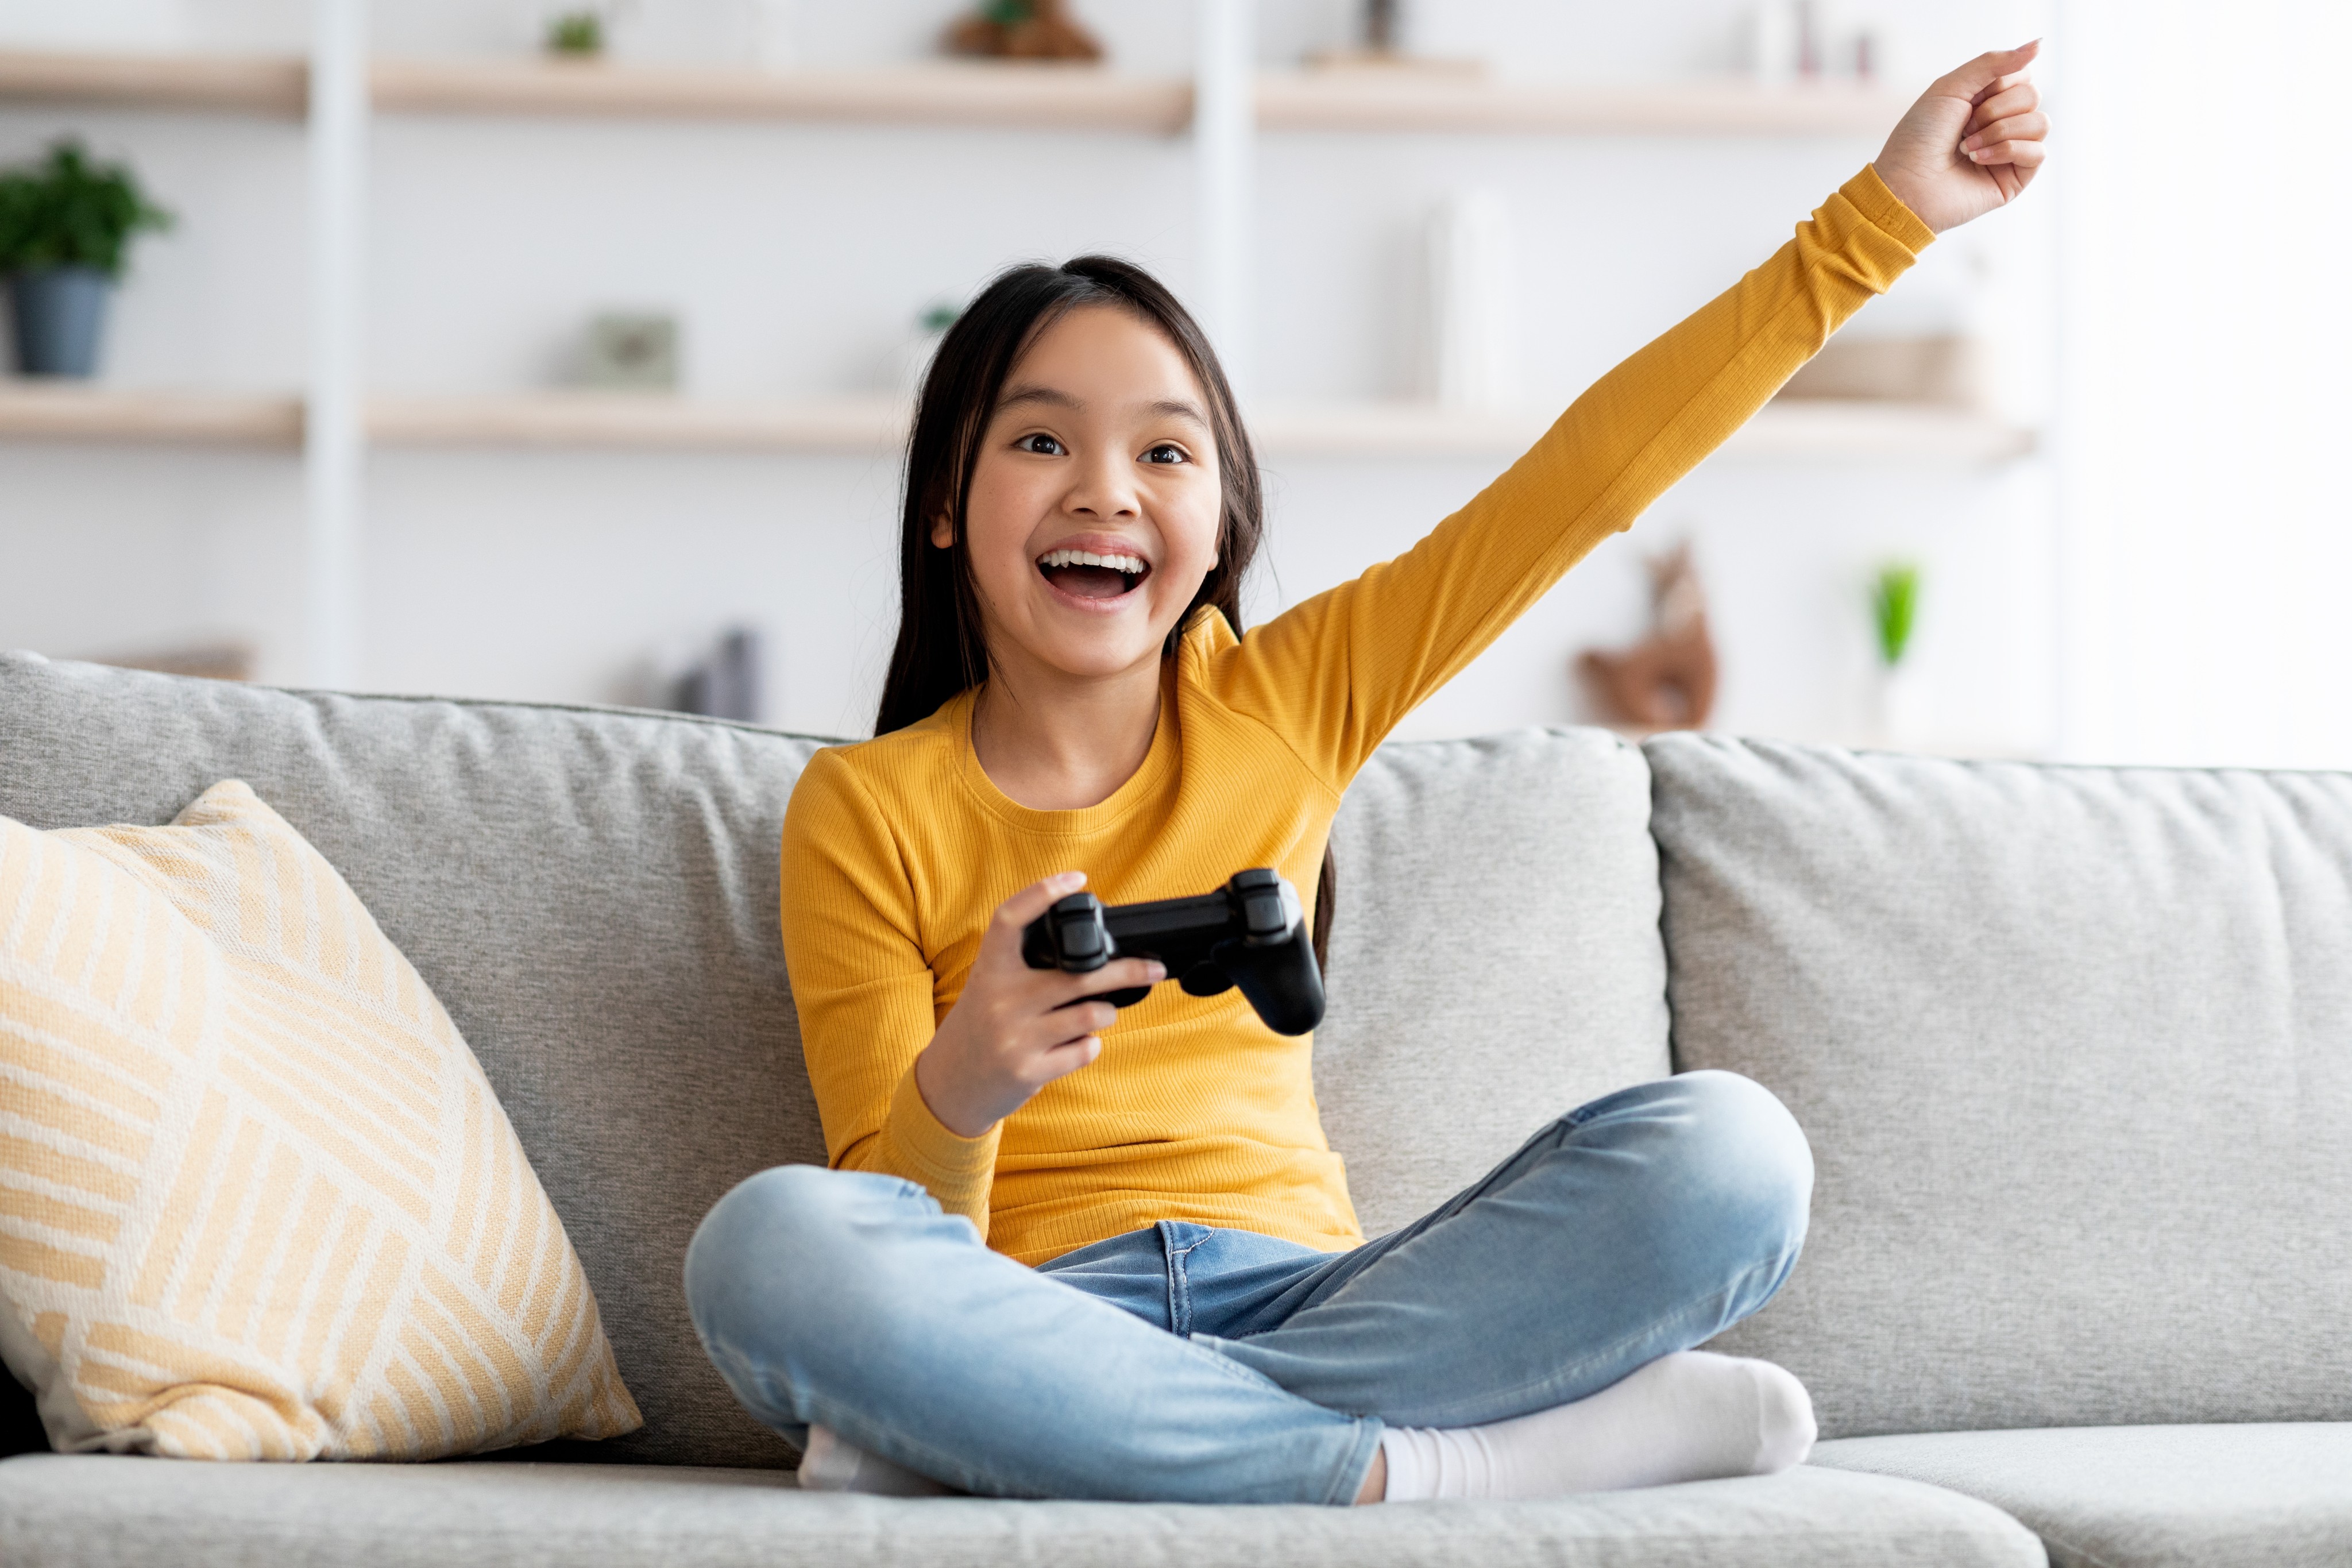 Playing Video Games May Have Cognitive Benefits for Pre-Teens